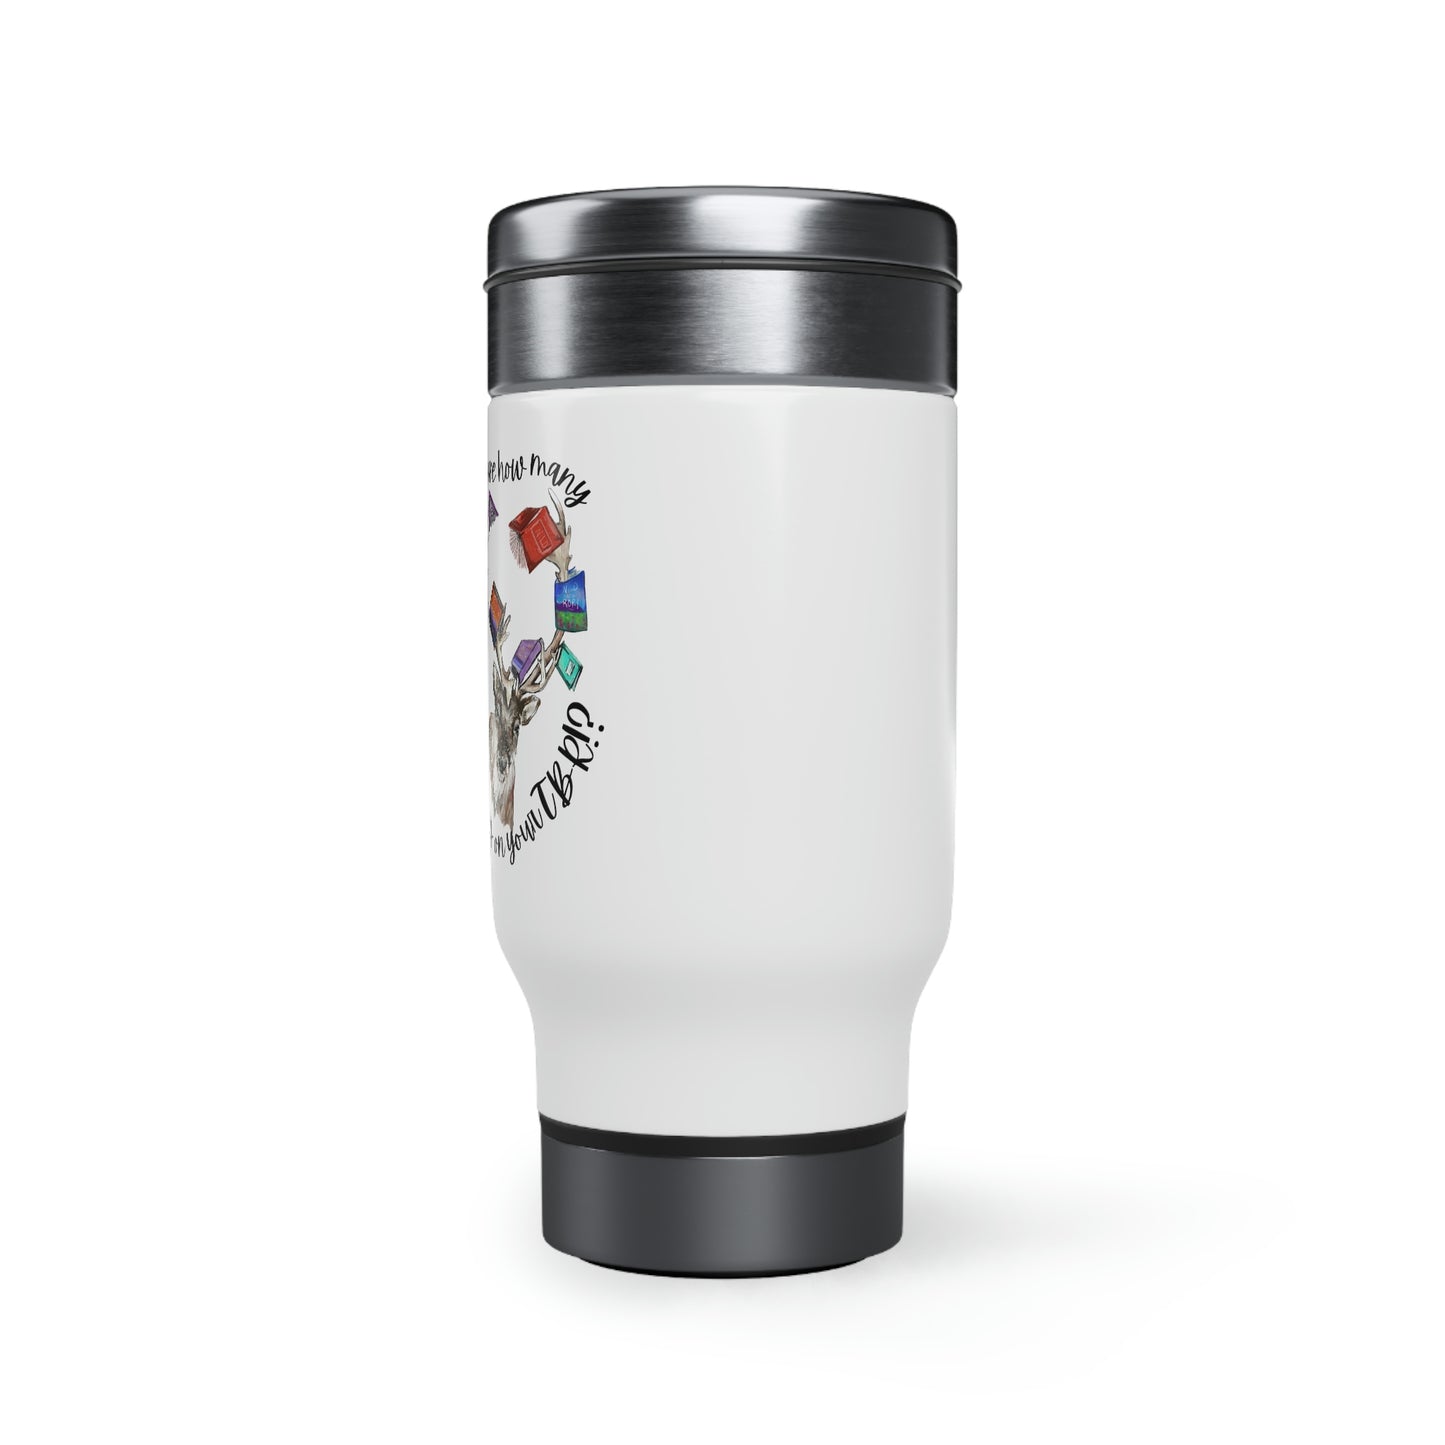 Caribou TBR Stainless Steel Travel Mug with Handle, 14oz